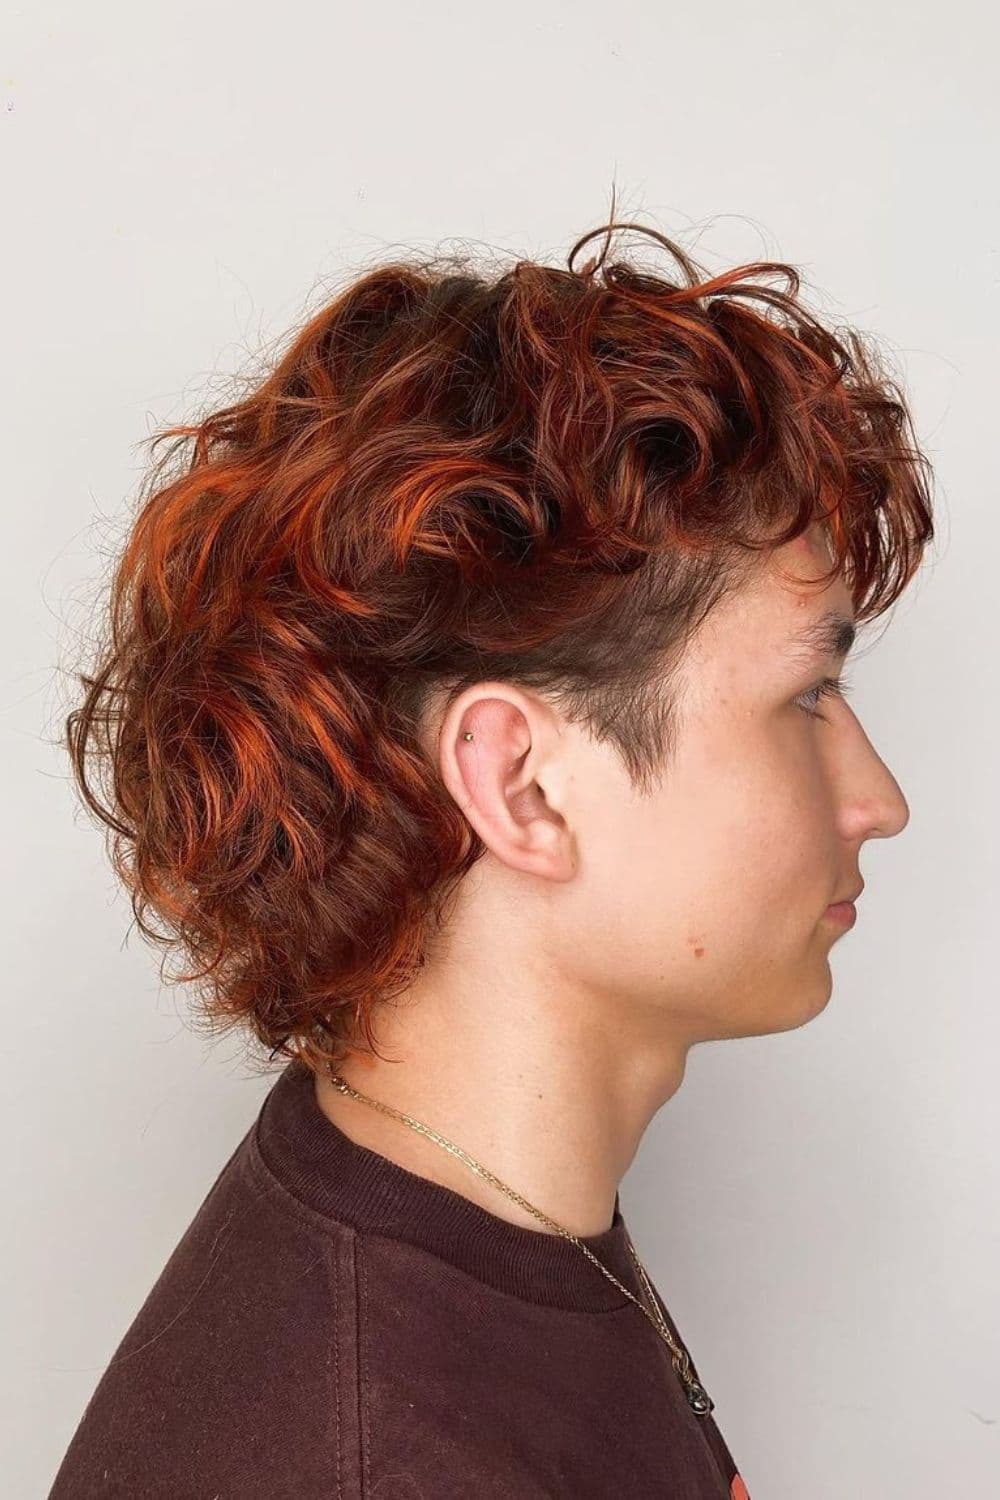 Side view of a man with curly mullet with red highlights.